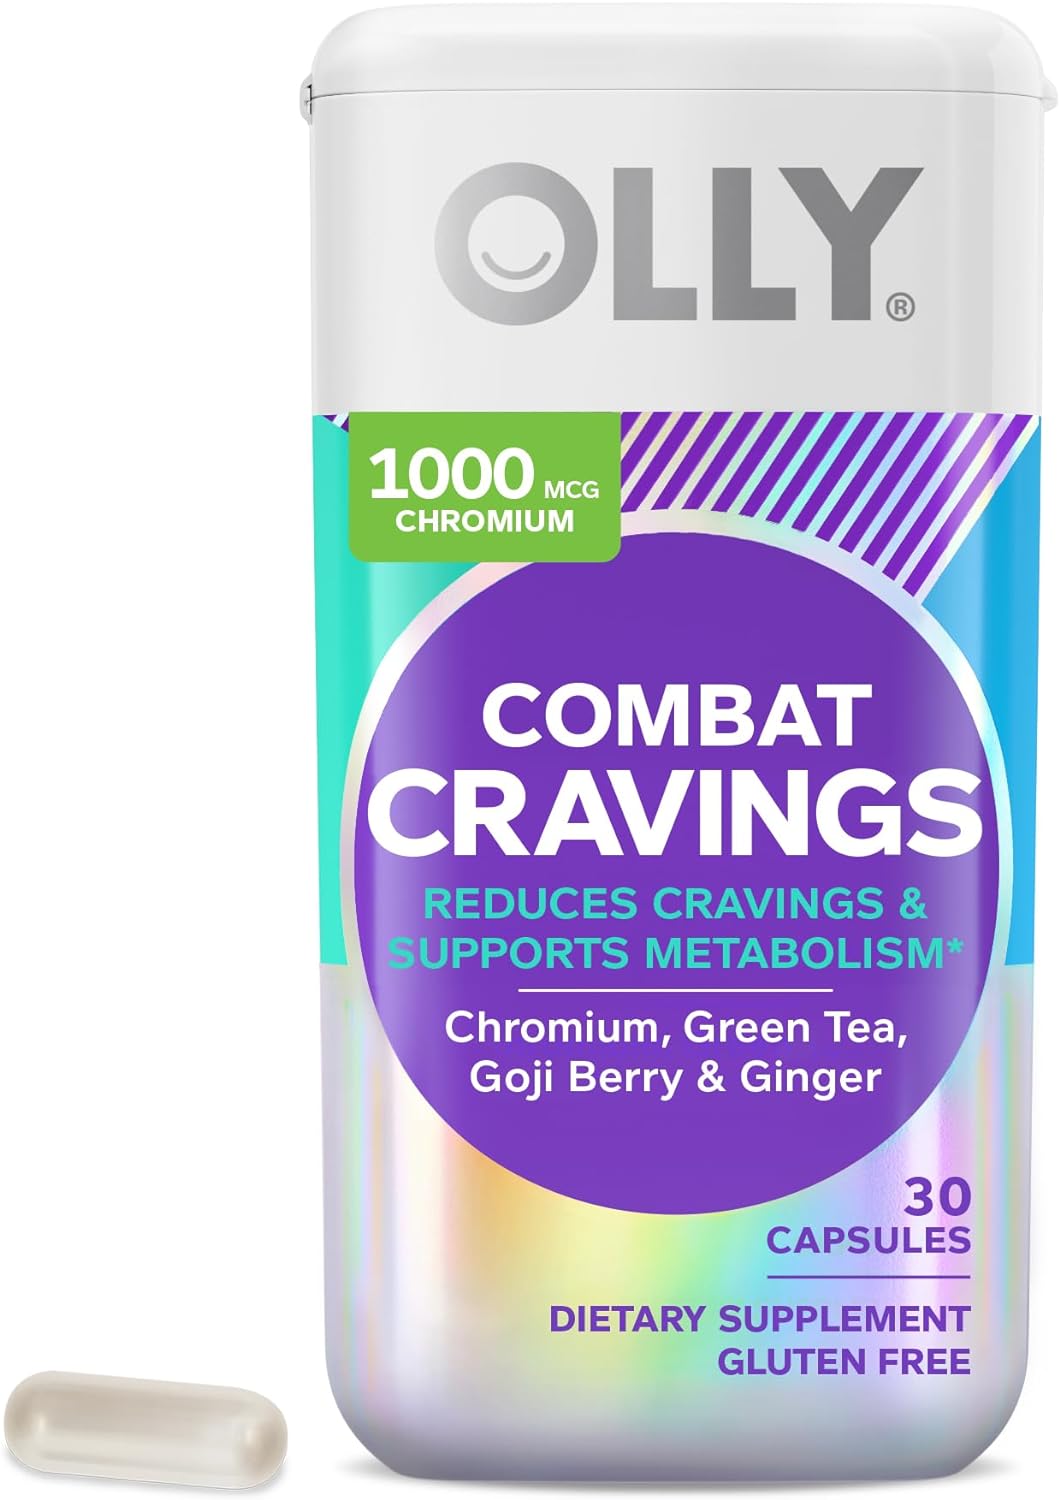 OLLY Combat Cravings Supplement Review